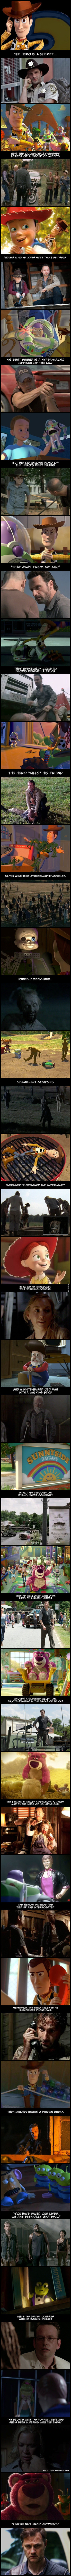 The Walking Dead & Toy Story Have The Same Plot